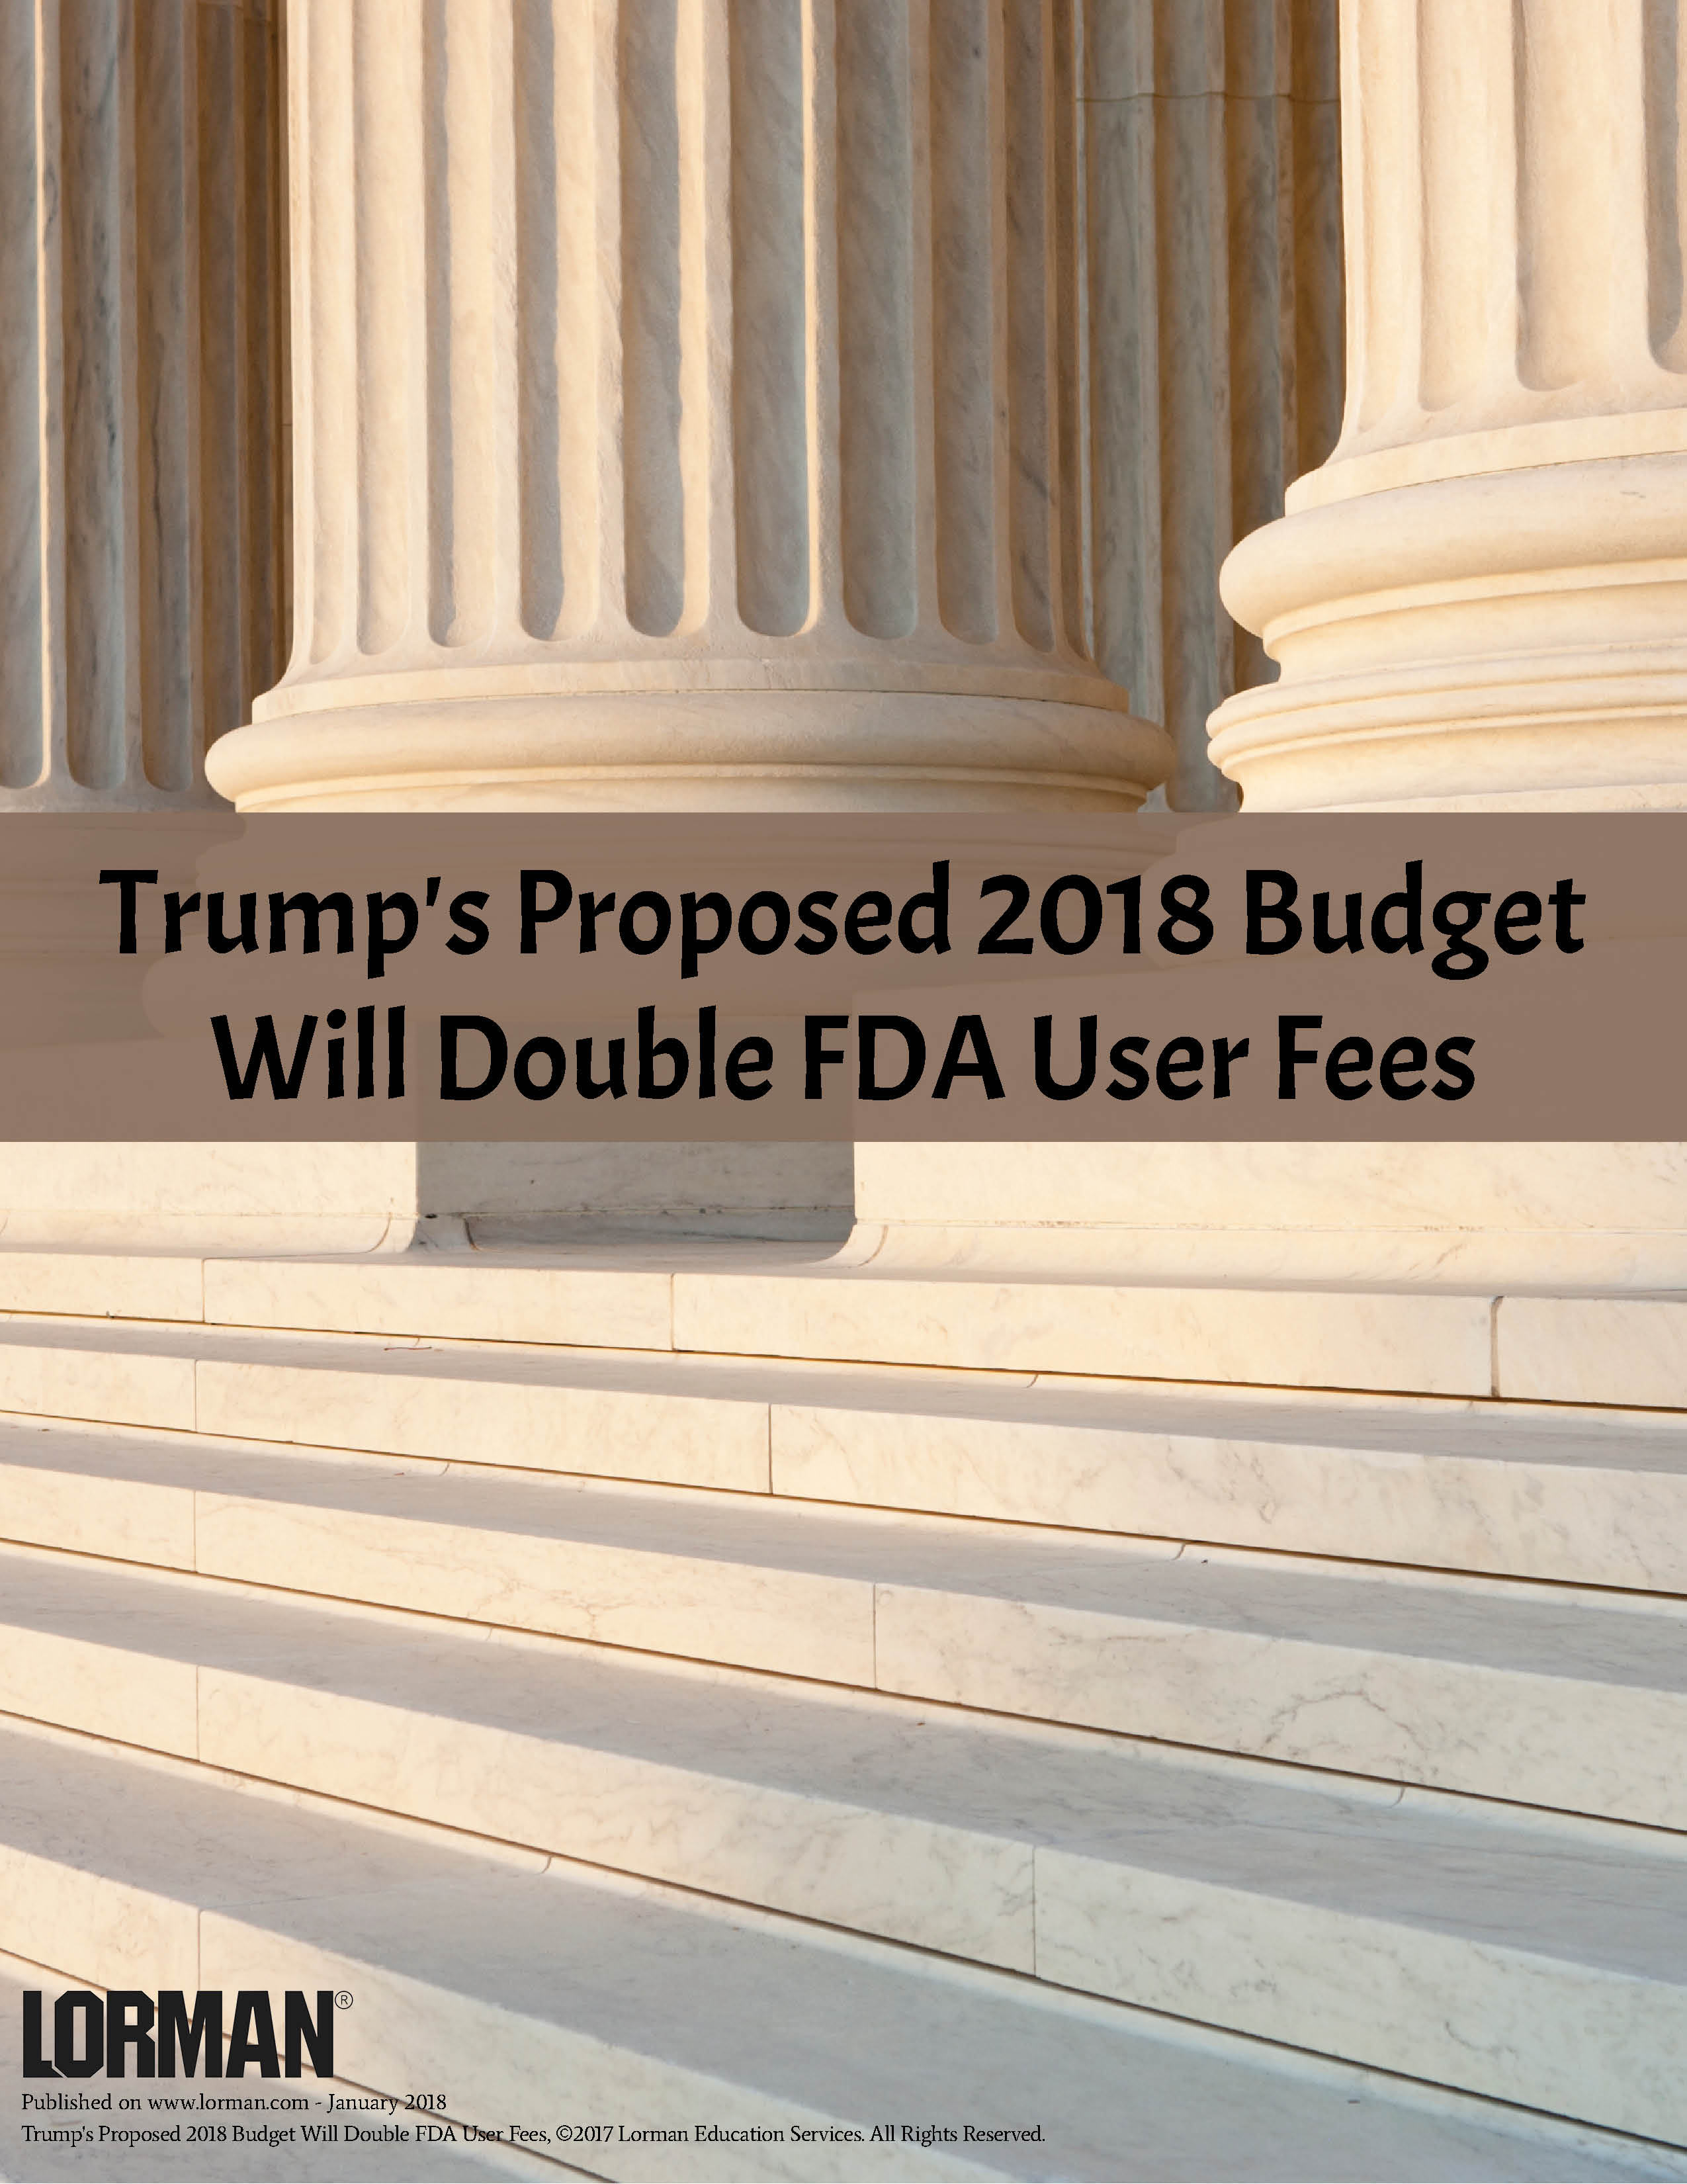 Trump's Proposed 2018 Budget Will Double FDA User Fees